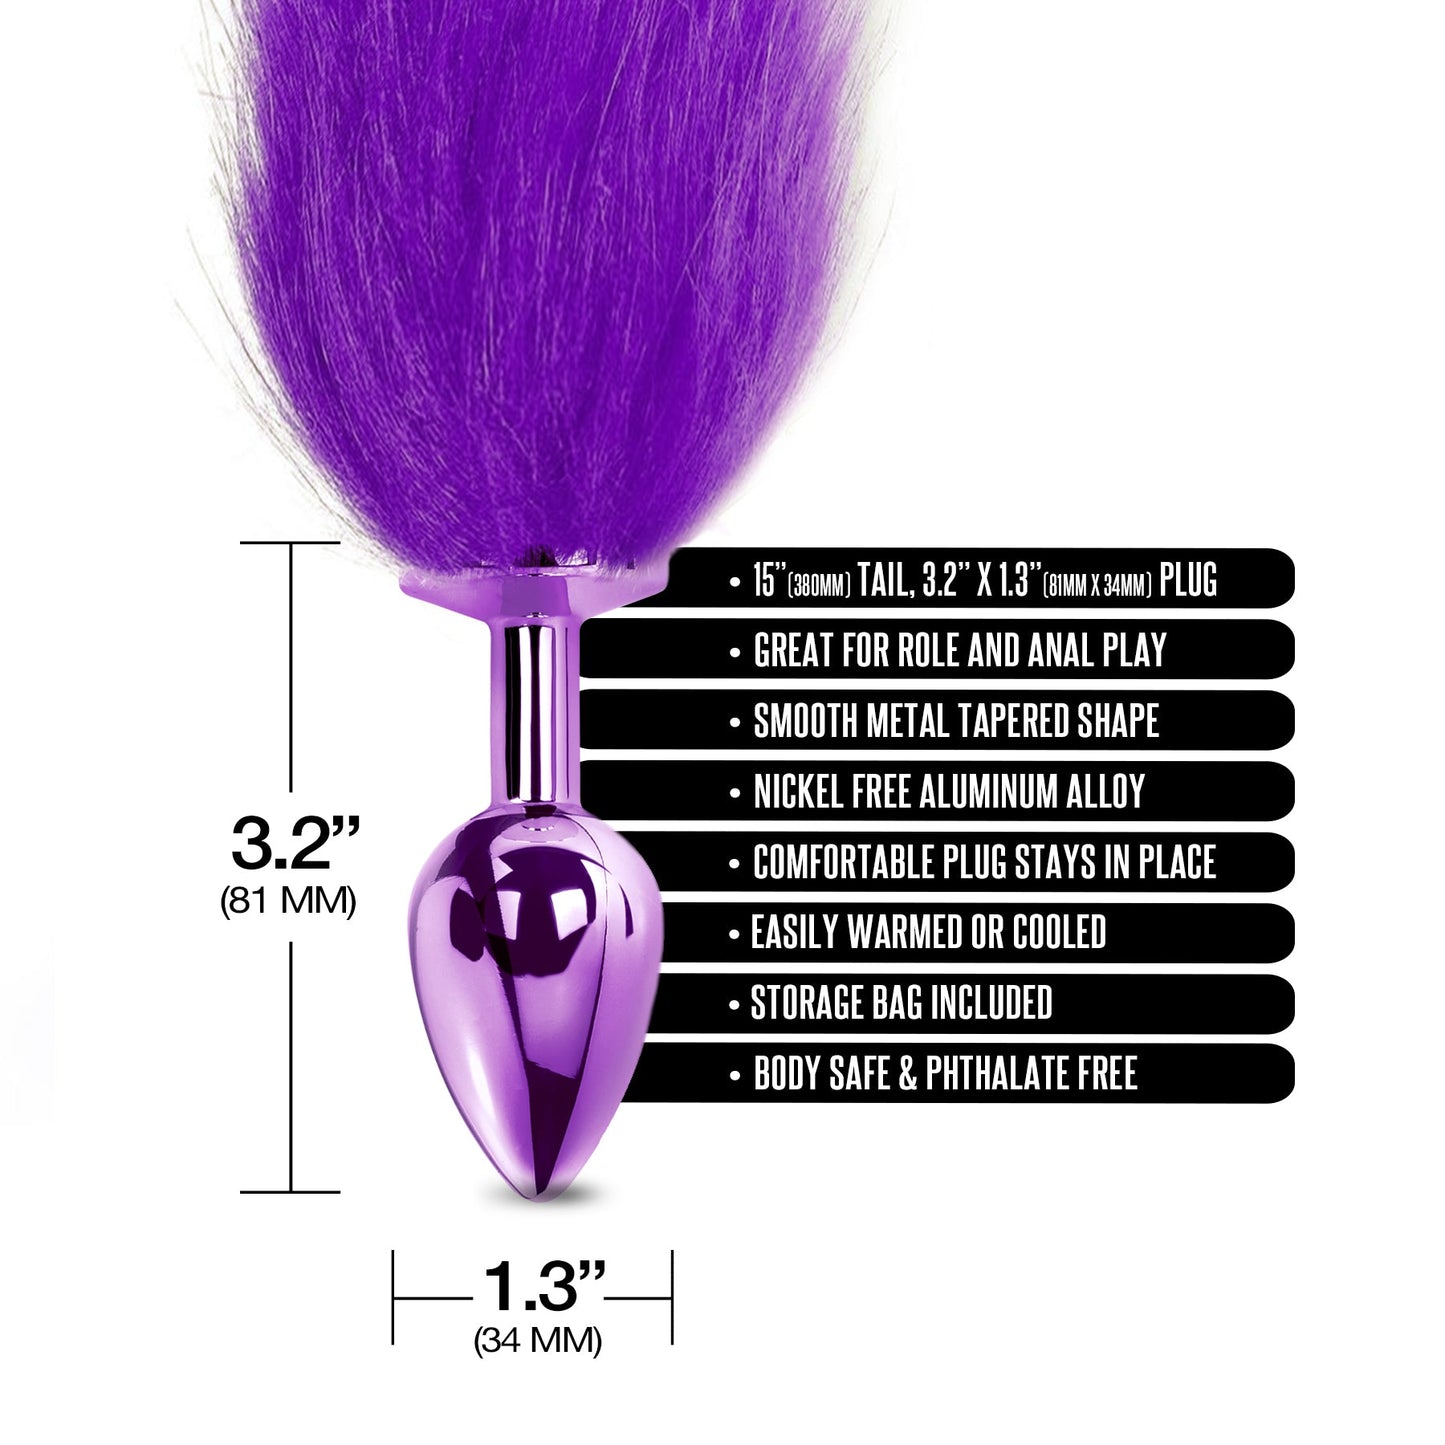 NIXIE Metal Butt Plug with Ombre Tail, Purple - THES